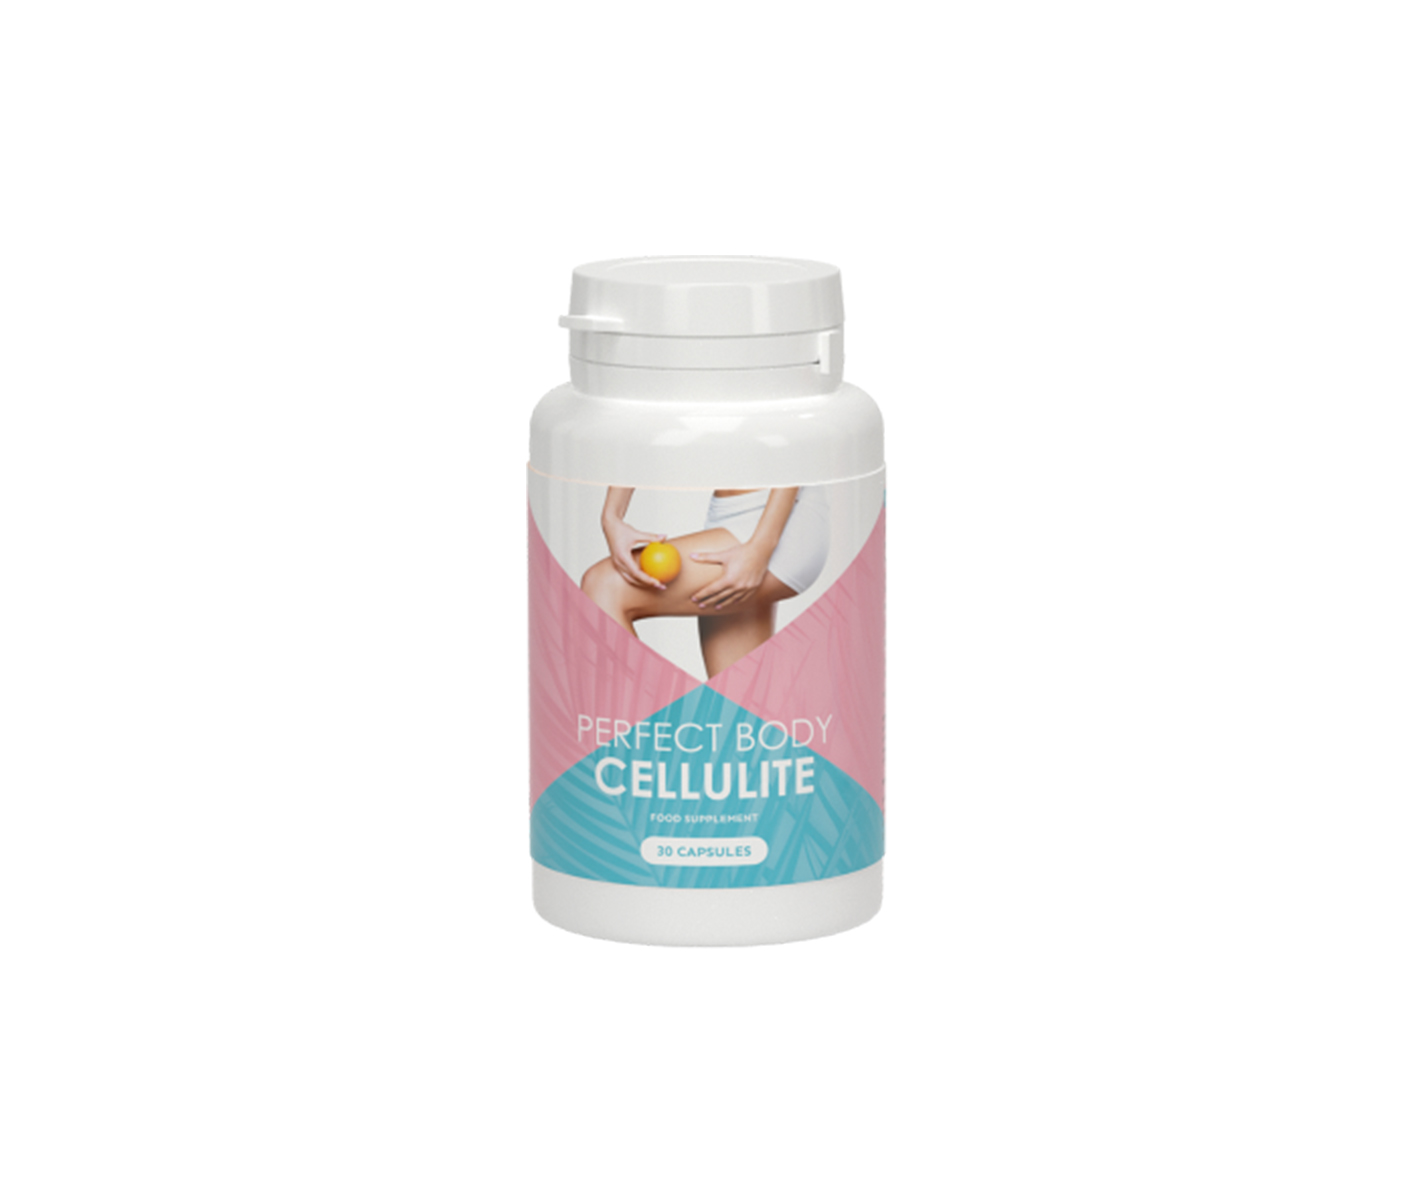 Perfect Body Cellulite, a supplement for cellulite